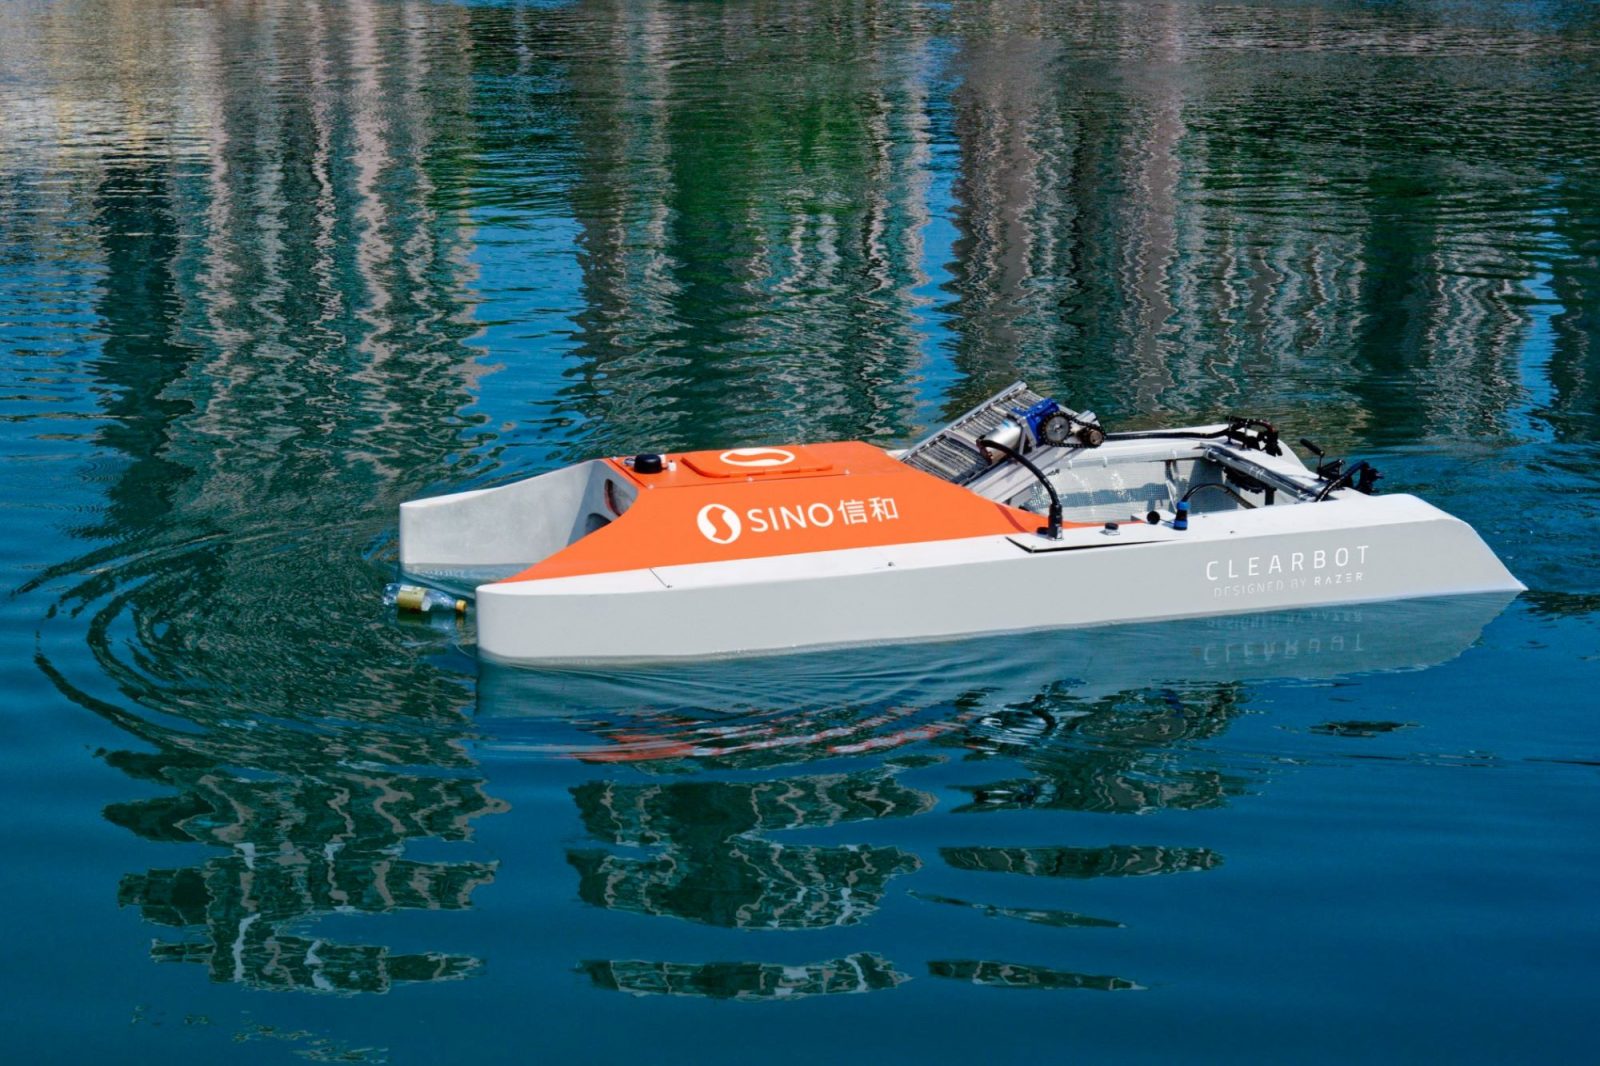 Image of Clearbot Neo, an AI-enabled robotic boat